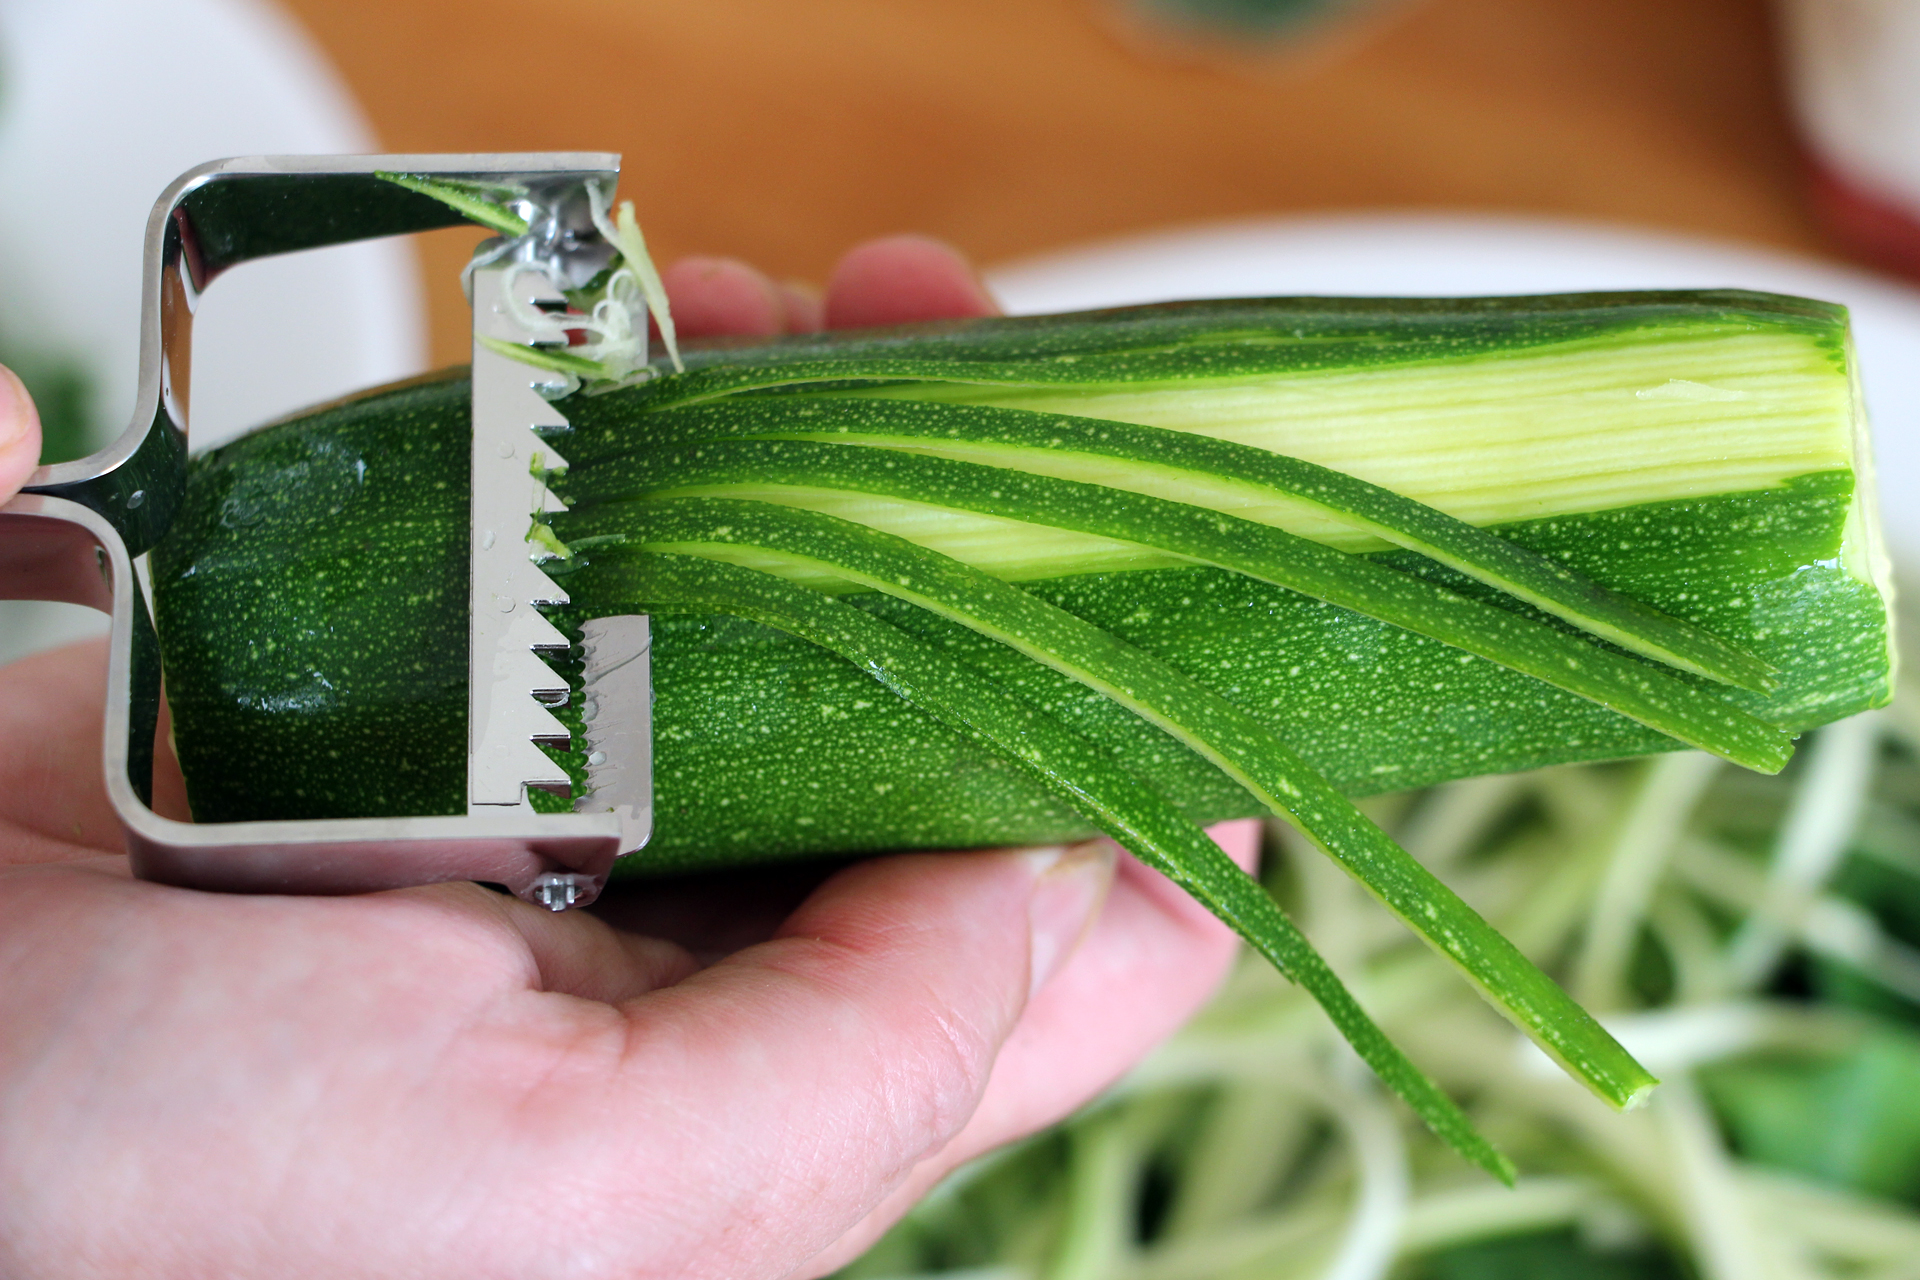 Creating zucchini “noodles” with a julienne peeler.